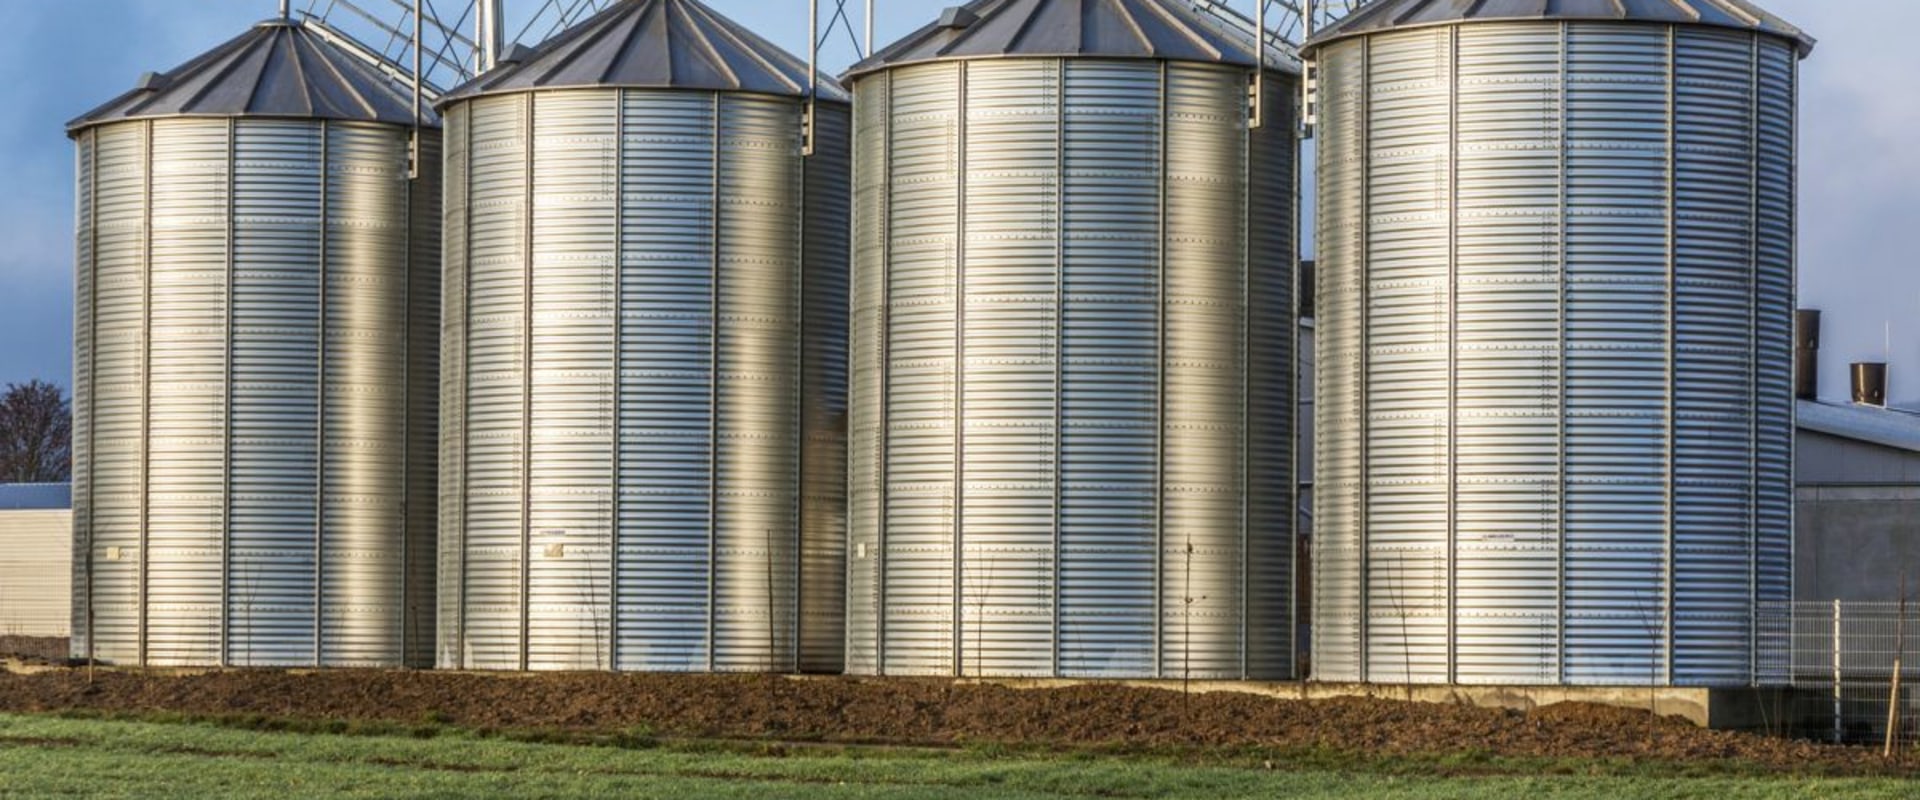 What is the silo metaphor?